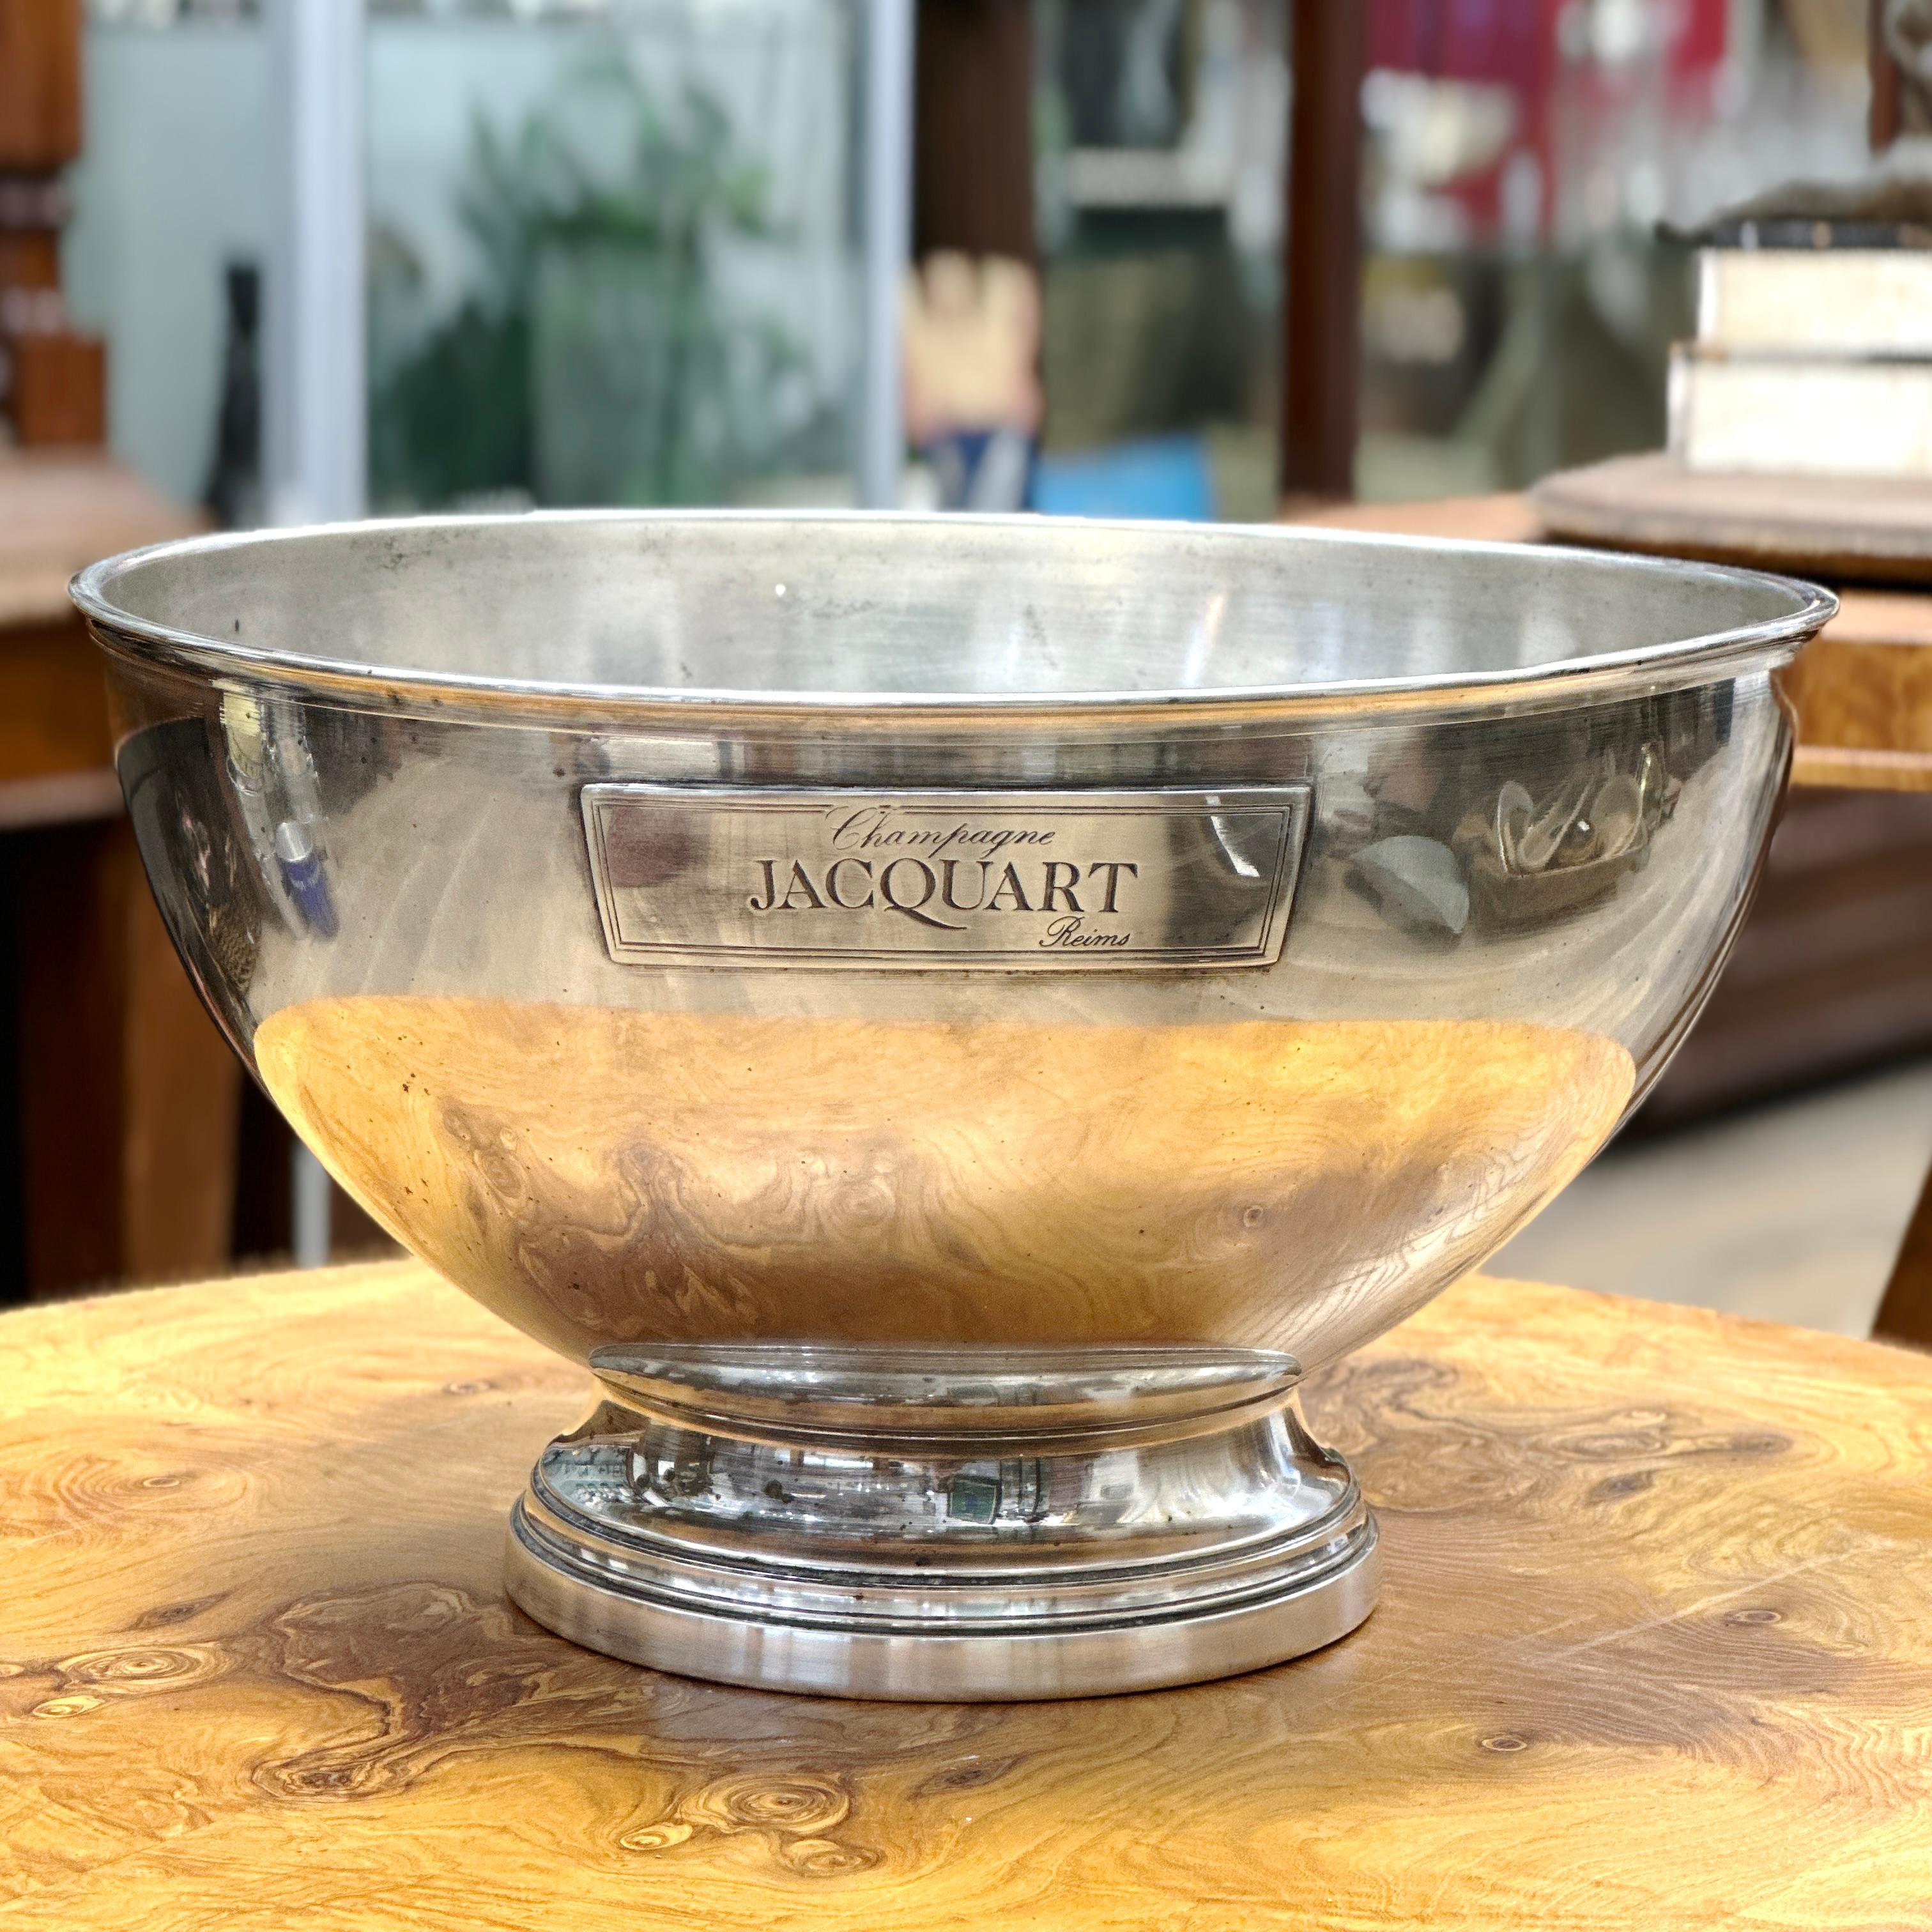 Here is a beautiful and Large French Vintage JACQUART Reims Silver Plated Champagne Bucket. 

This large mid century French silver plated hotel champagne bucket circa 1960s, features an engraved label on both sides stating “CHAMPAGNE JACQUART REIMS”